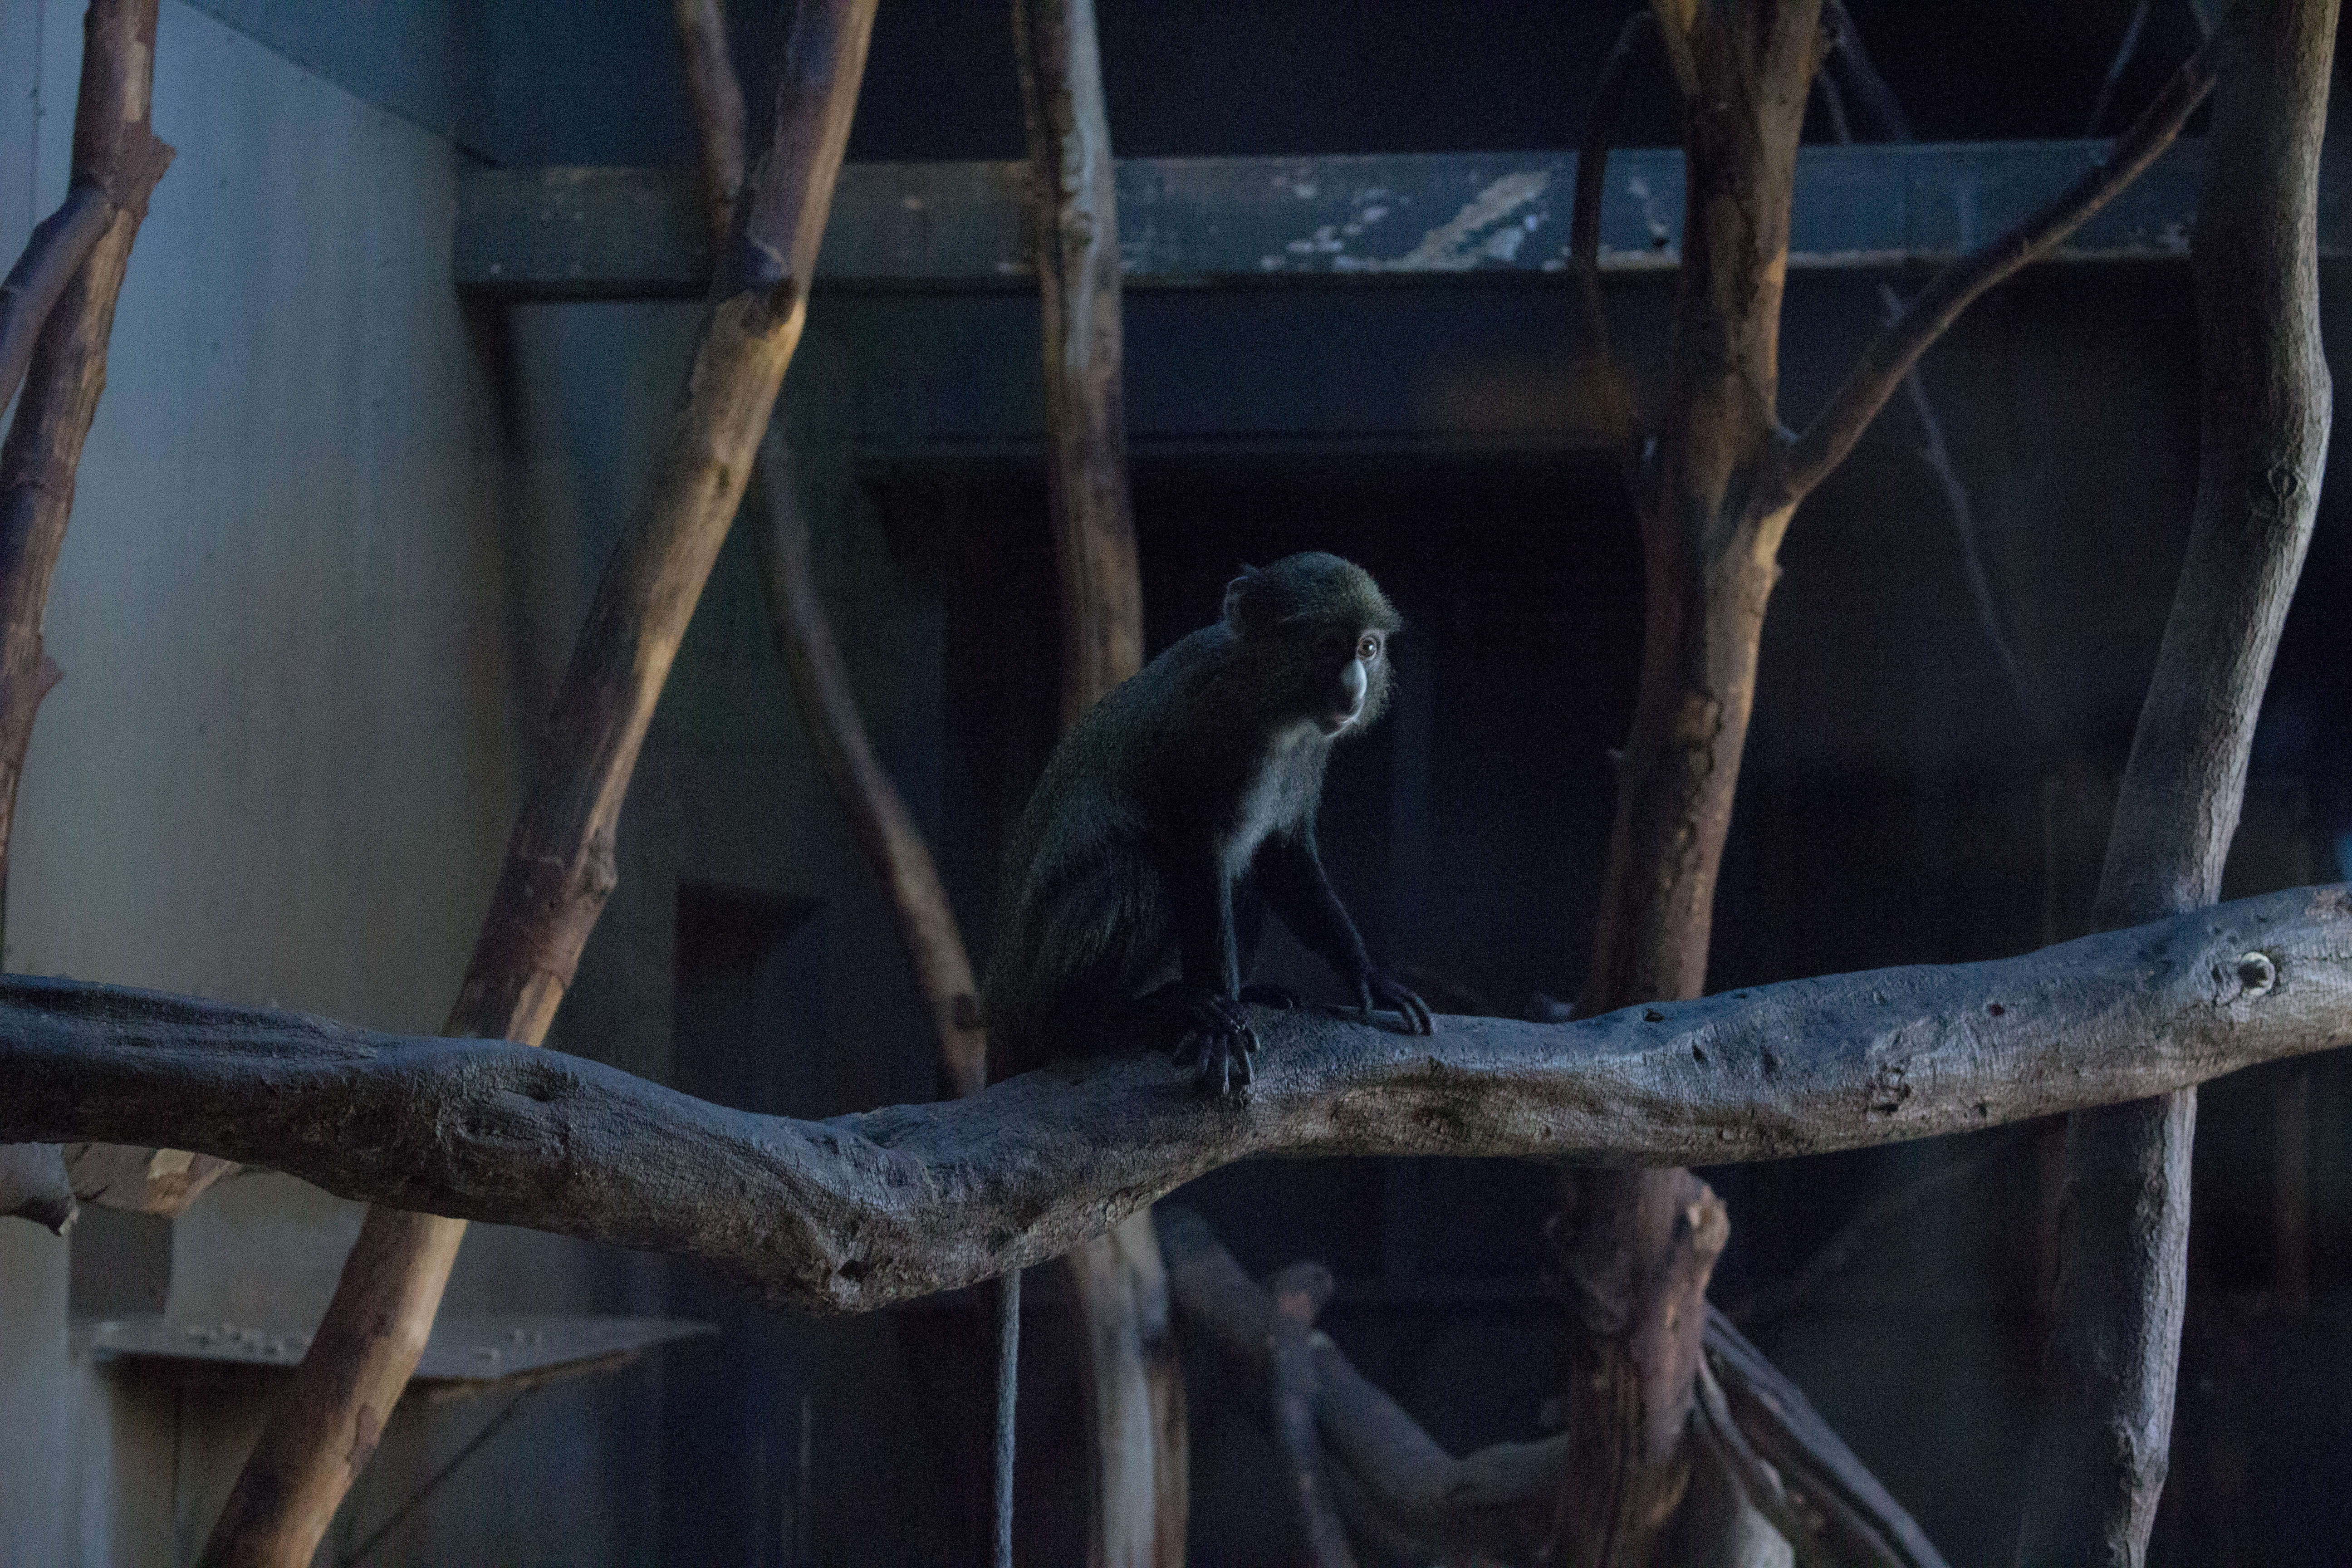 Image of Greater Spot-nosed Guenon